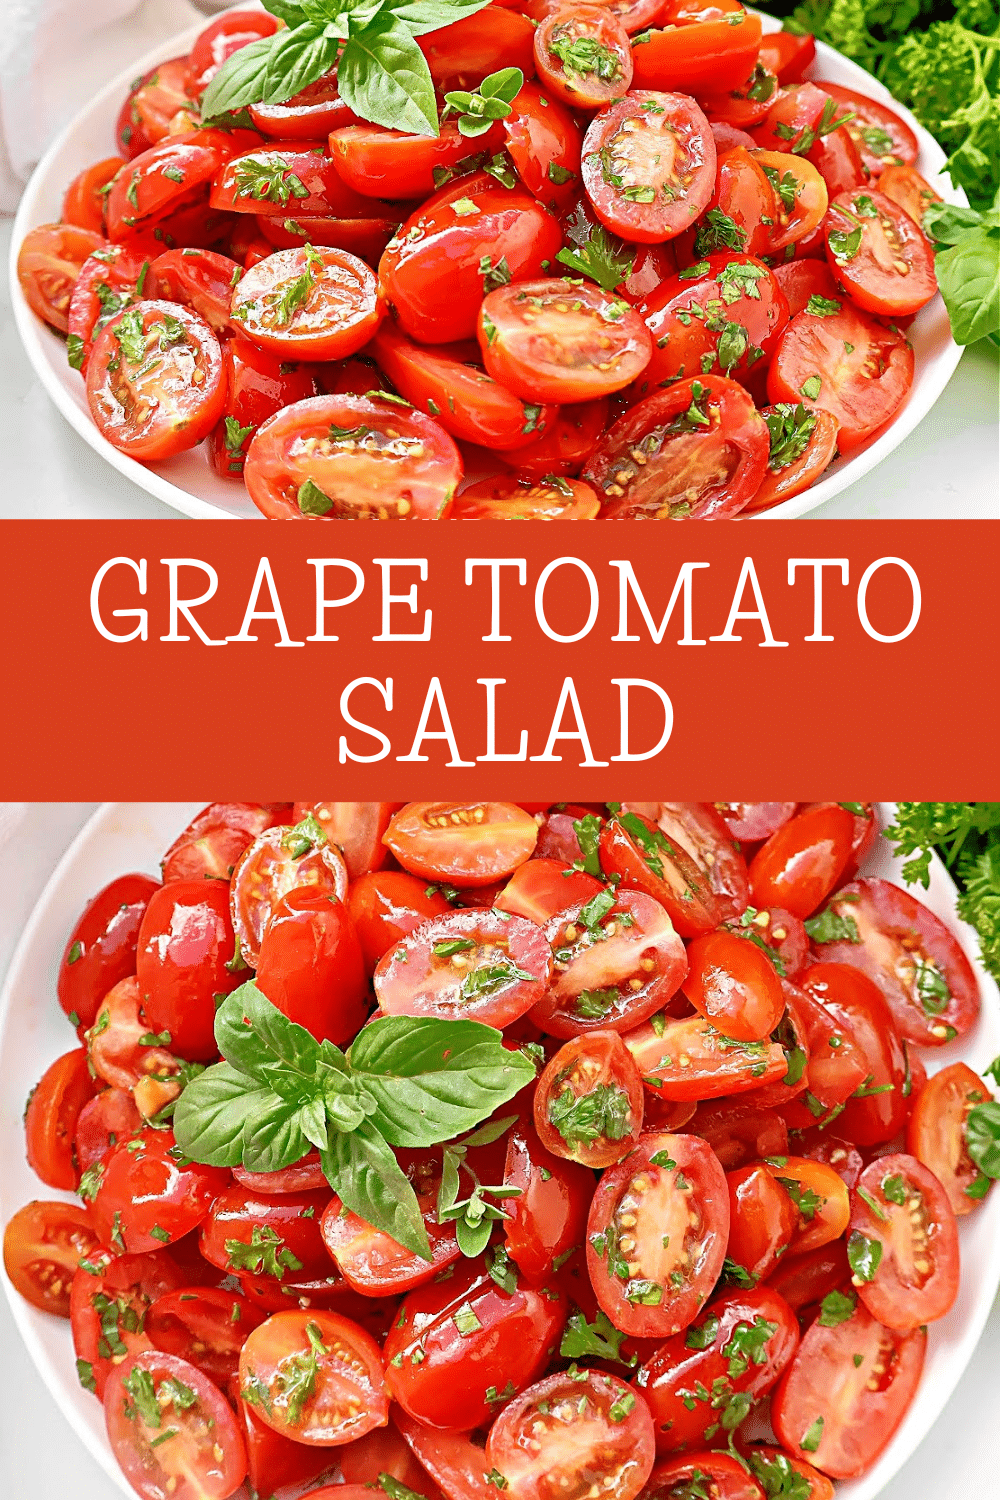 Grape Tomato Salad ~ Garden fresh tomatoes and herbs in a simple vinaigrette. A healthy side dish that highlights flavors of the season. via @thiswifecooks